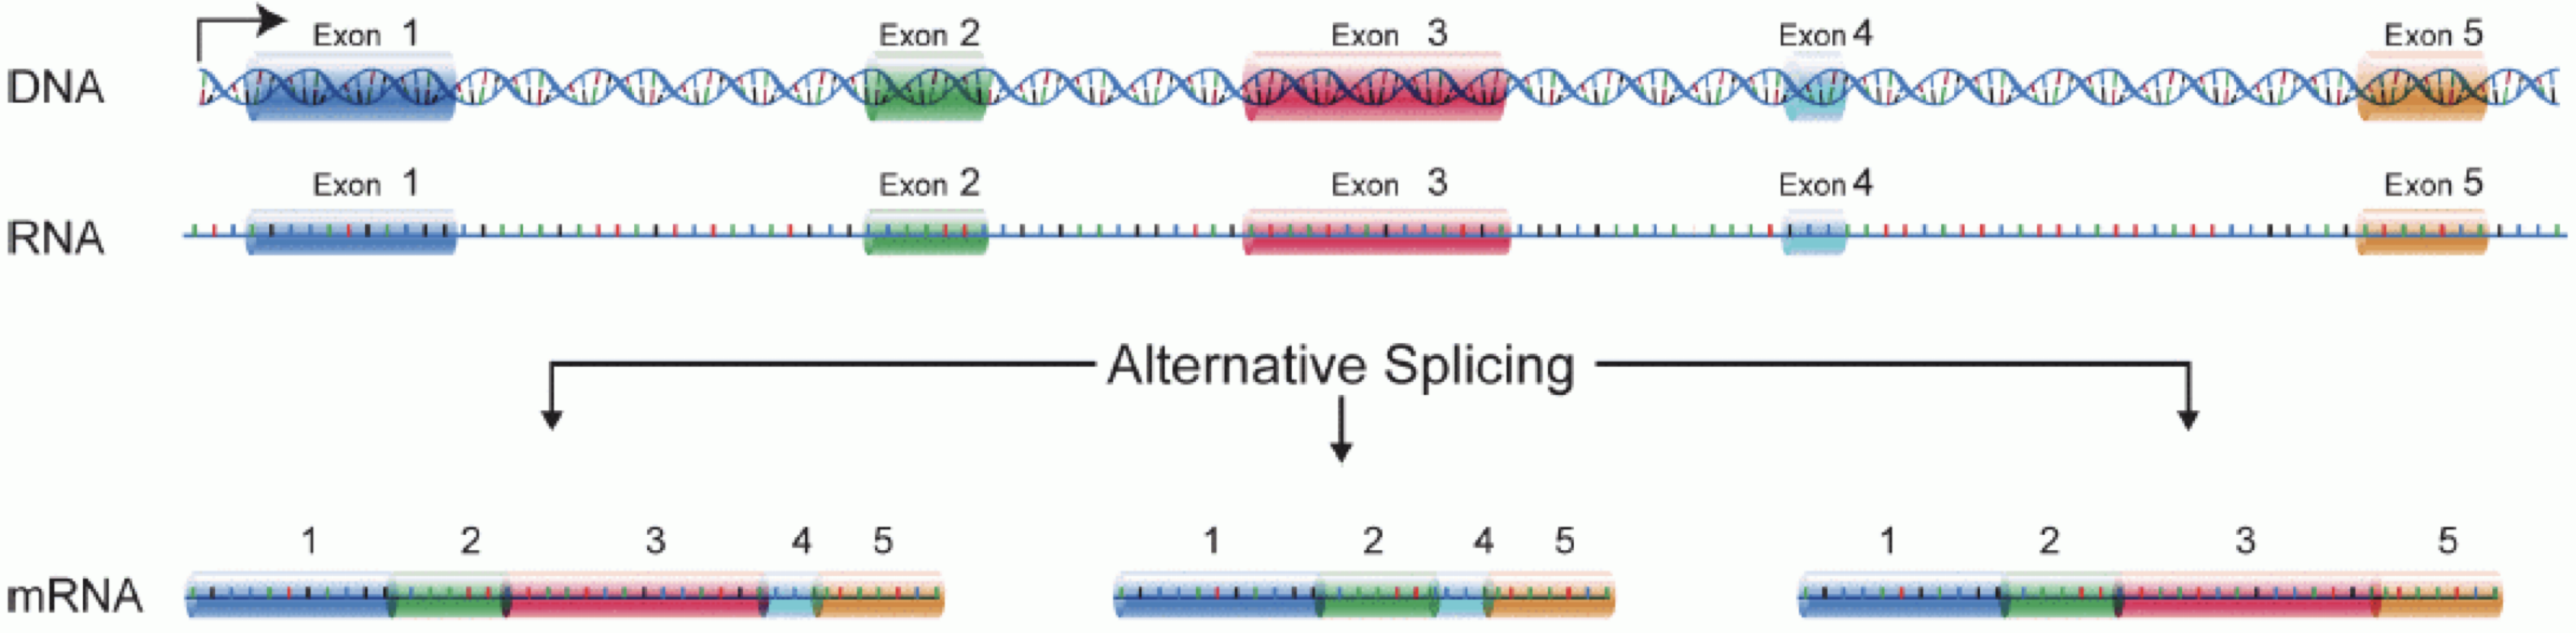 Illustration of part of the central dogma of molecular biology, where DNA is transcribed to RNA, and intronic sequences are spliced out